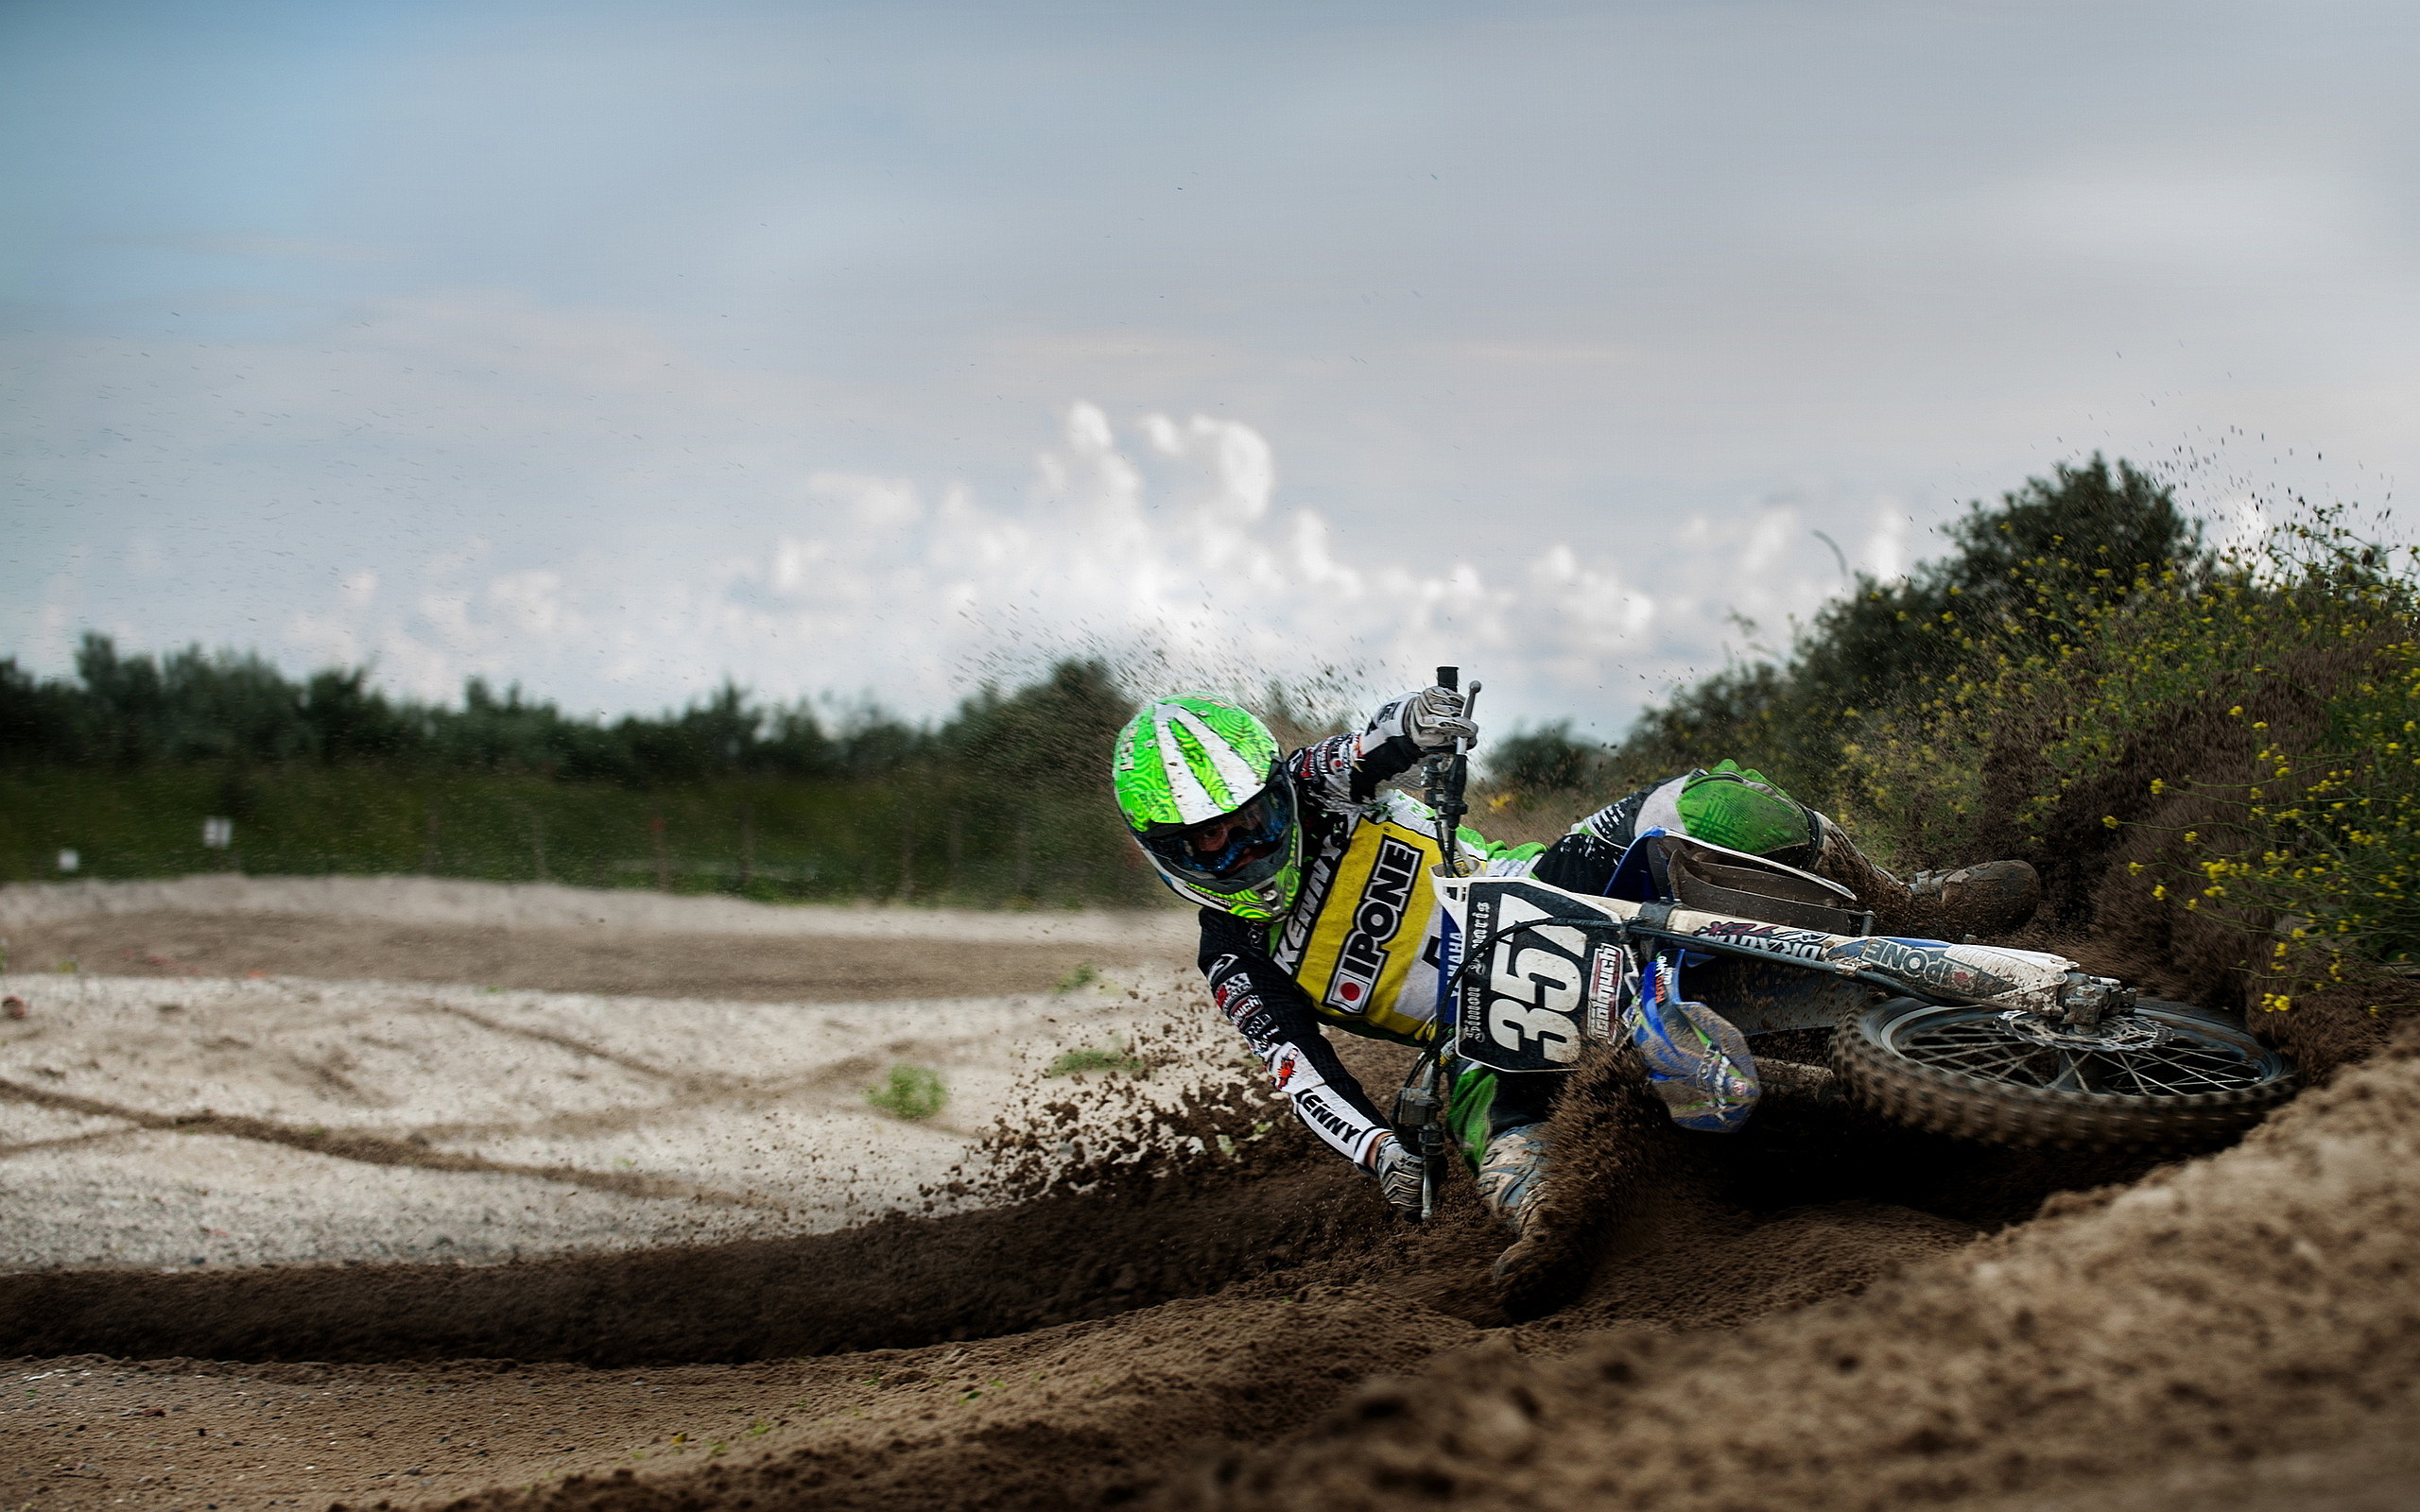 10 Awesome HD Motocross Wallpapers - HDWallSource.com